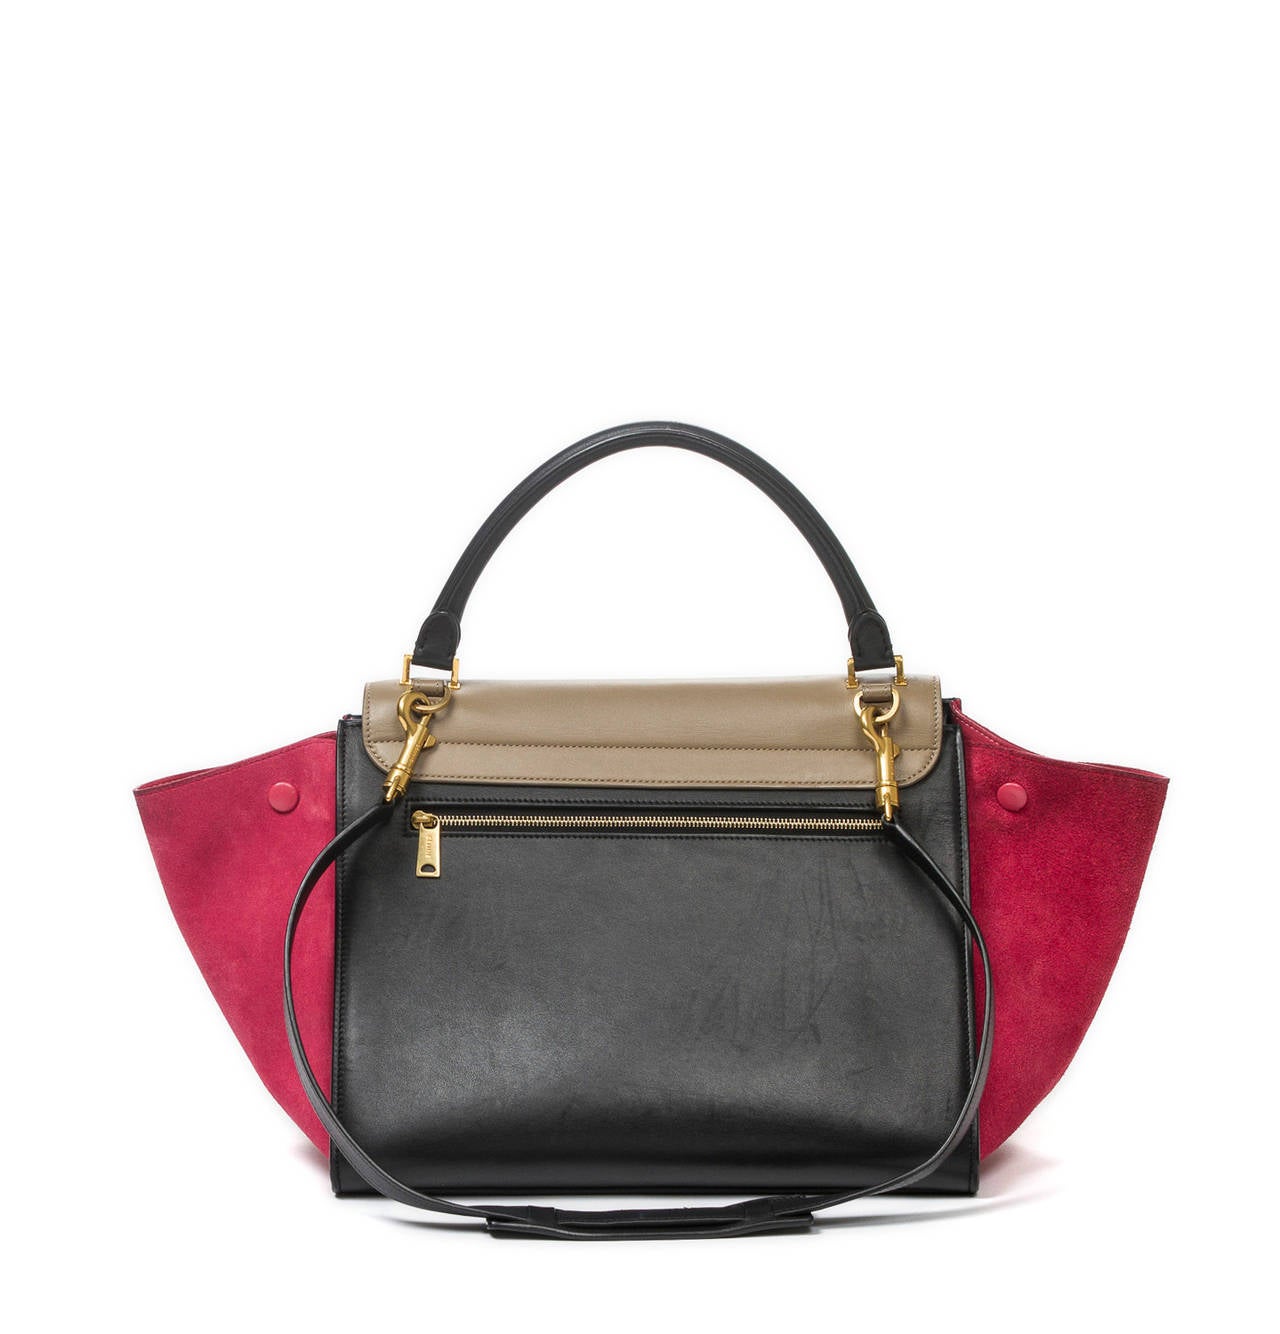 Céline Trapeze Tricolor Black/Taupe/Pink Leather For Sale 2